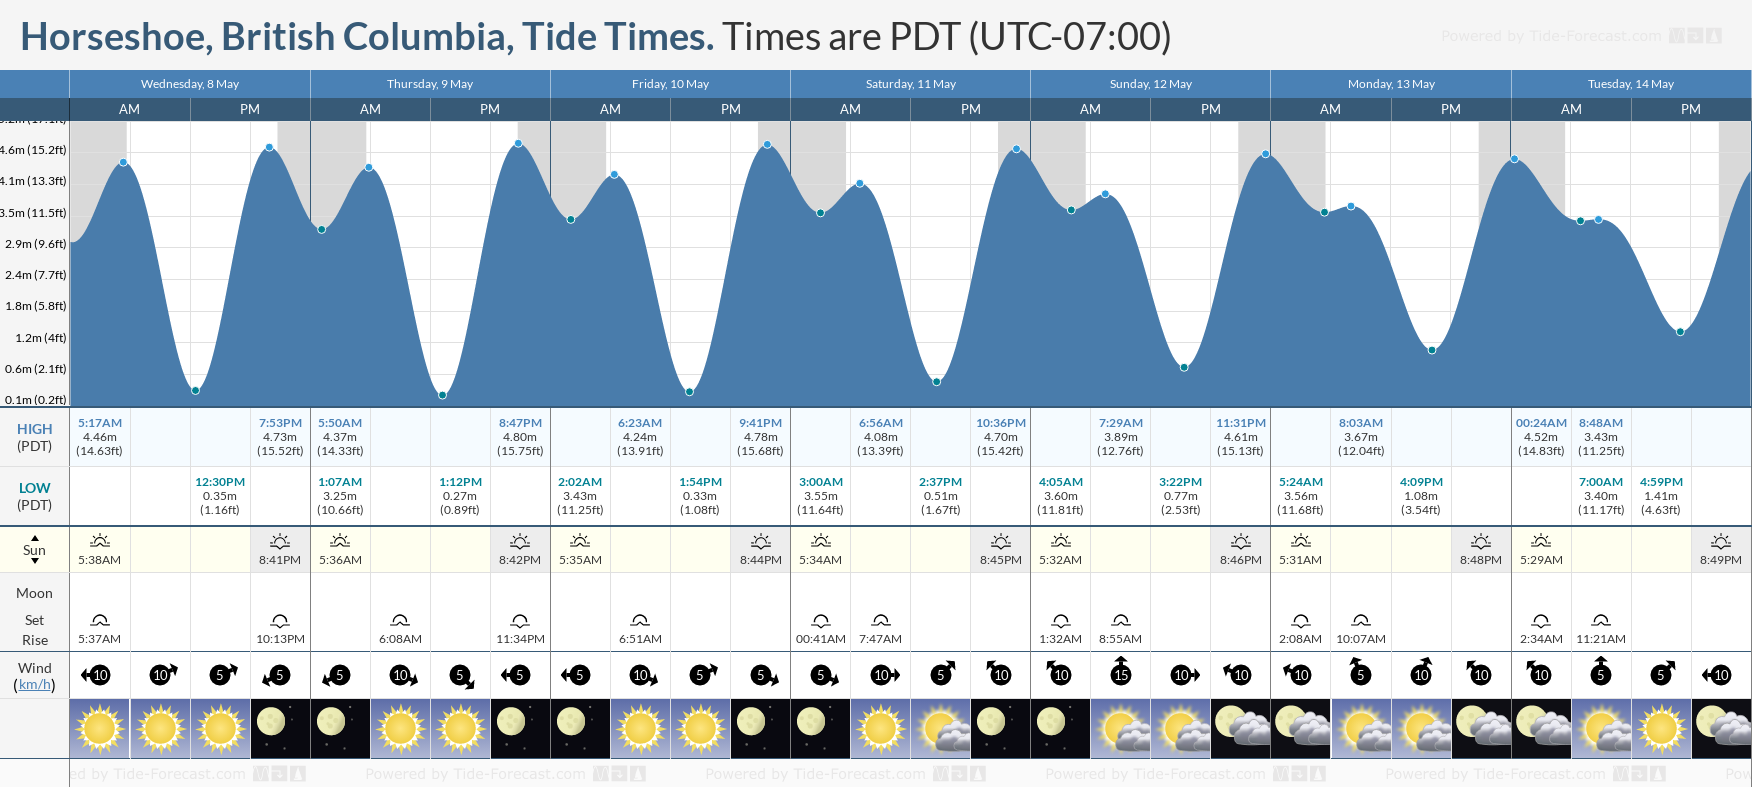 Horseshoe, British Columbia Tide Chart including high and low tide tide times for the next 7 days